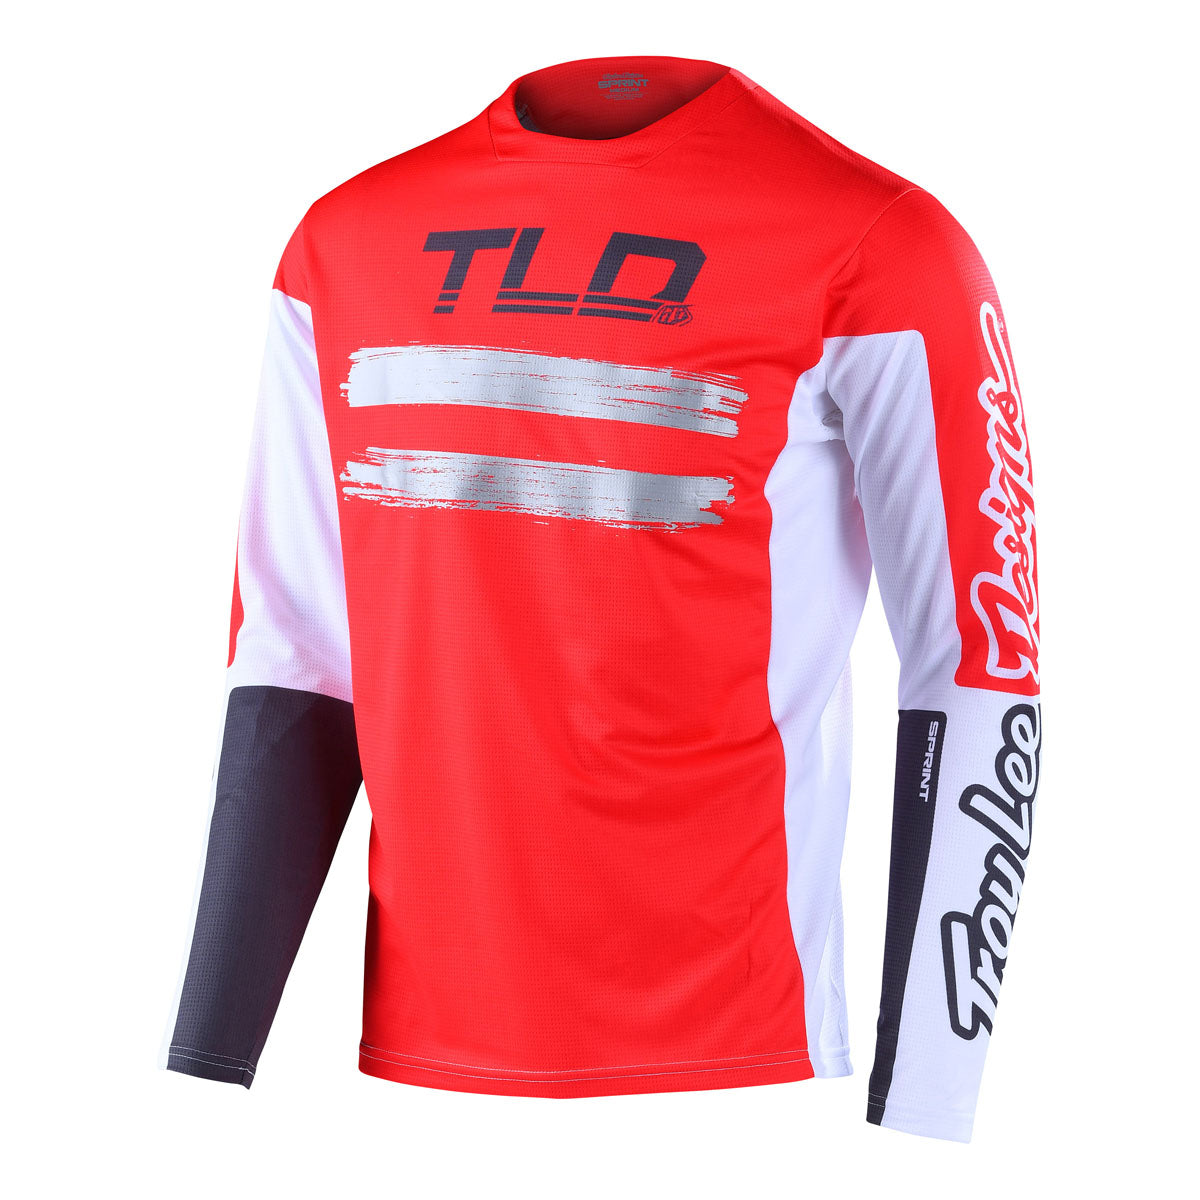 Troy Lee Designs Sprint Jersey (CLOSEOUT) - Marker Glo Red